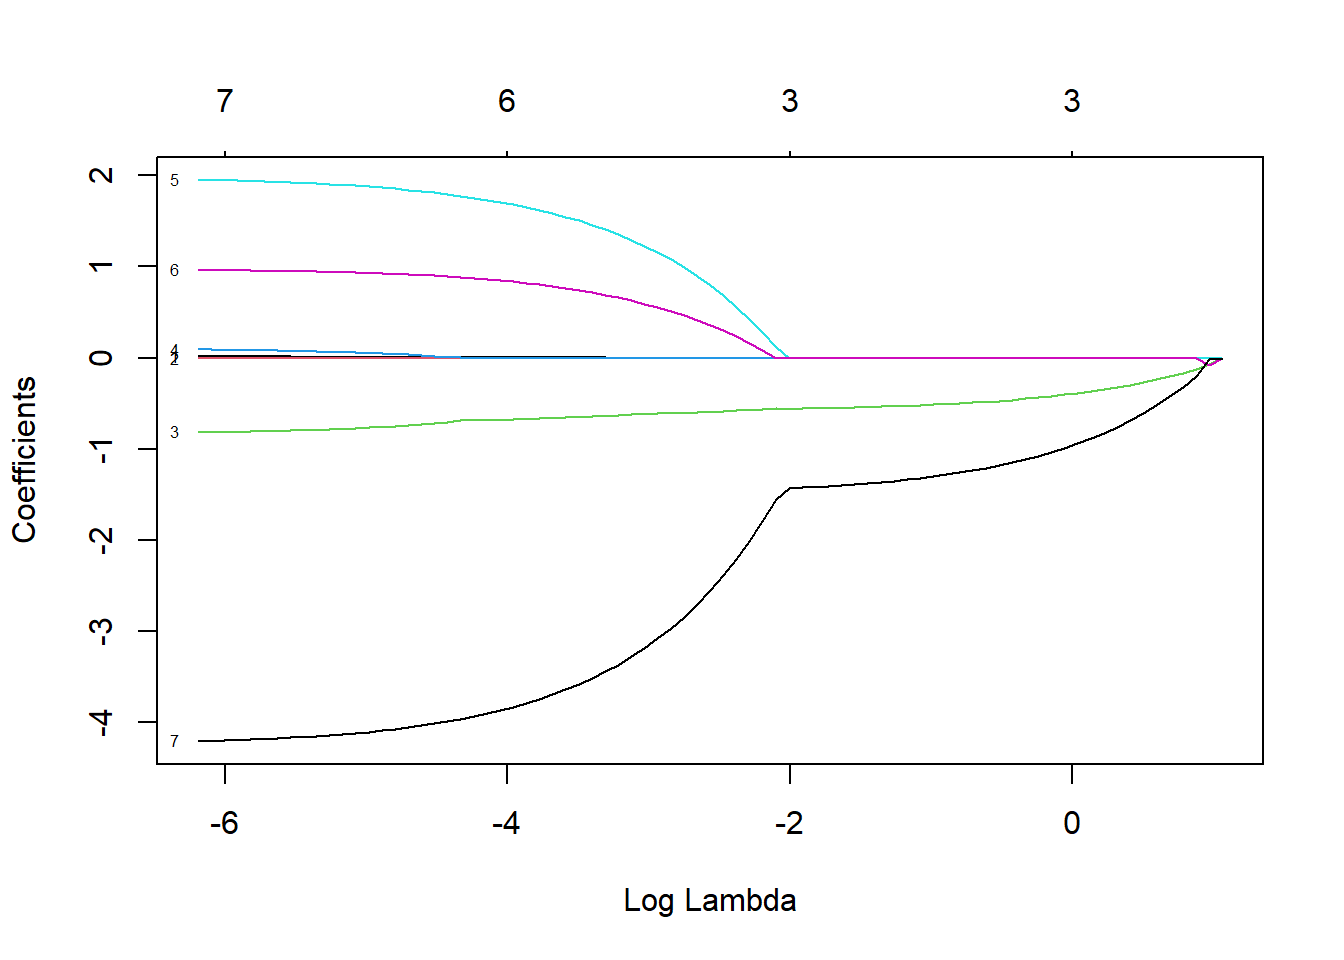 Coefficient estimates for predictors with the sleep data set when using the LASSO with different values of \(\lambda\).